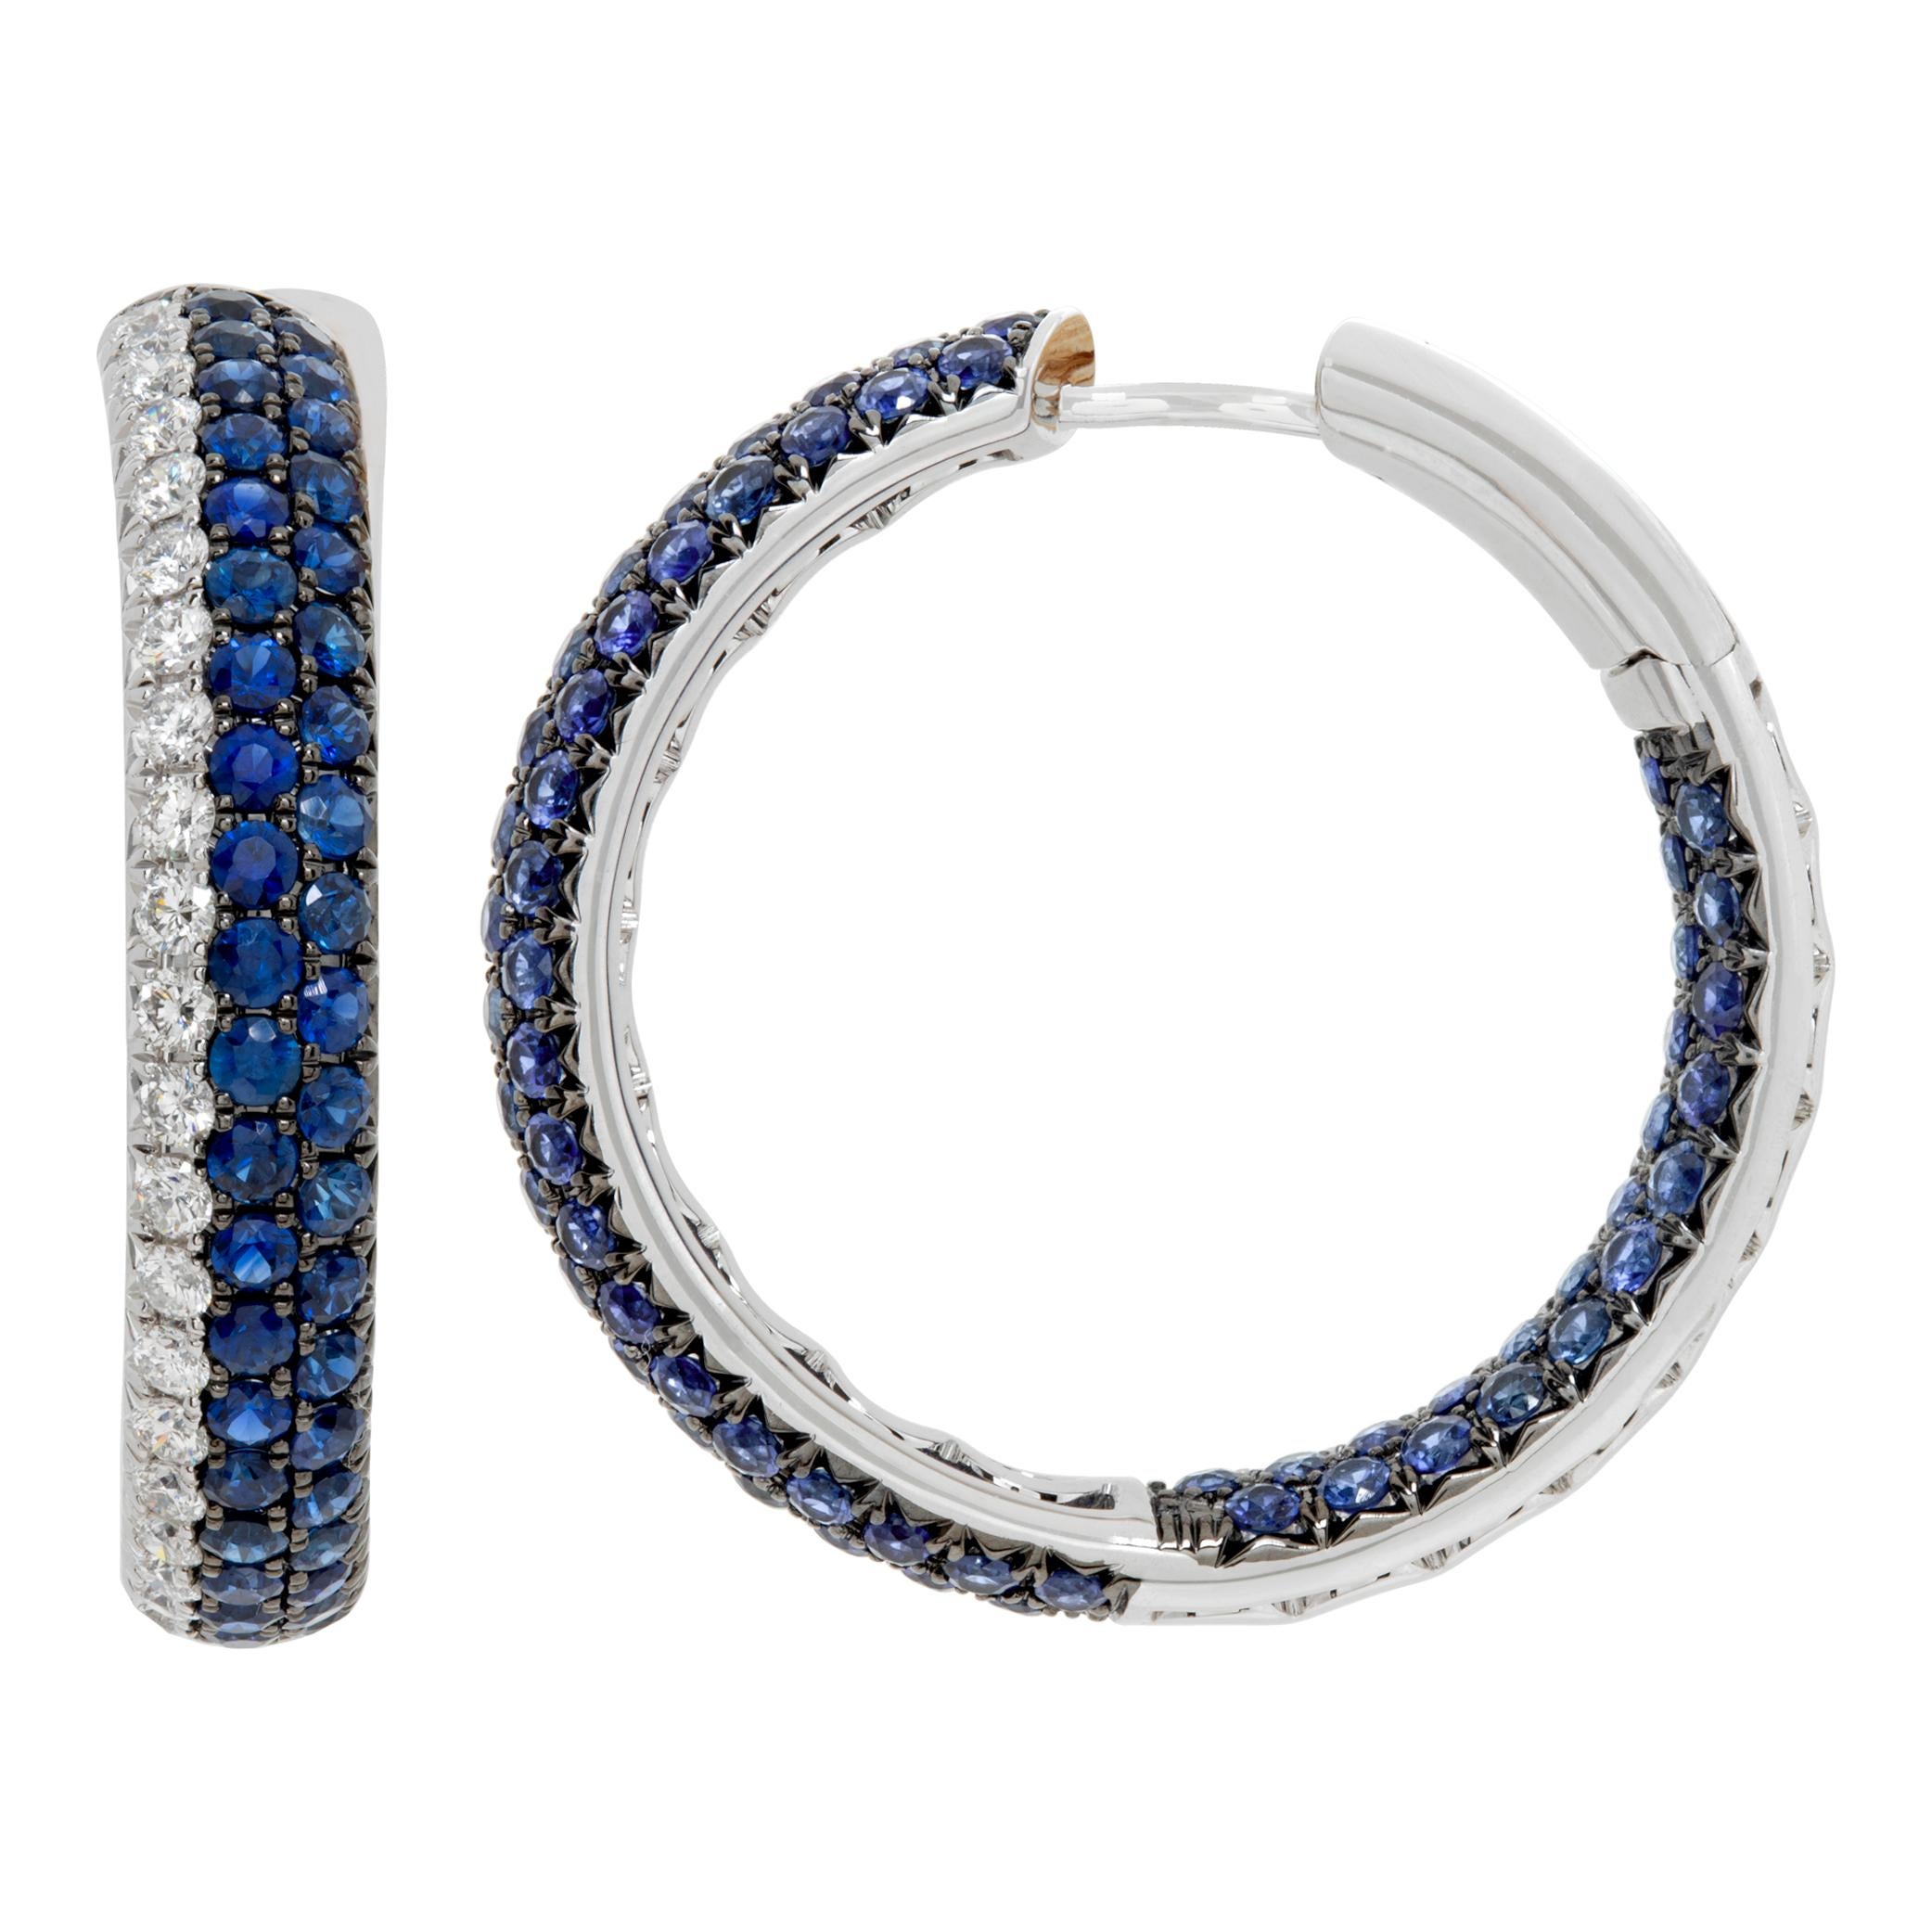 Inside-out hoops in 18k white gold with 1.73 carats in round brilliant cut diamonds (G-H Color, VS Clarity) and 4.17 carats in deep blue round sapphires. 30mm diameter.